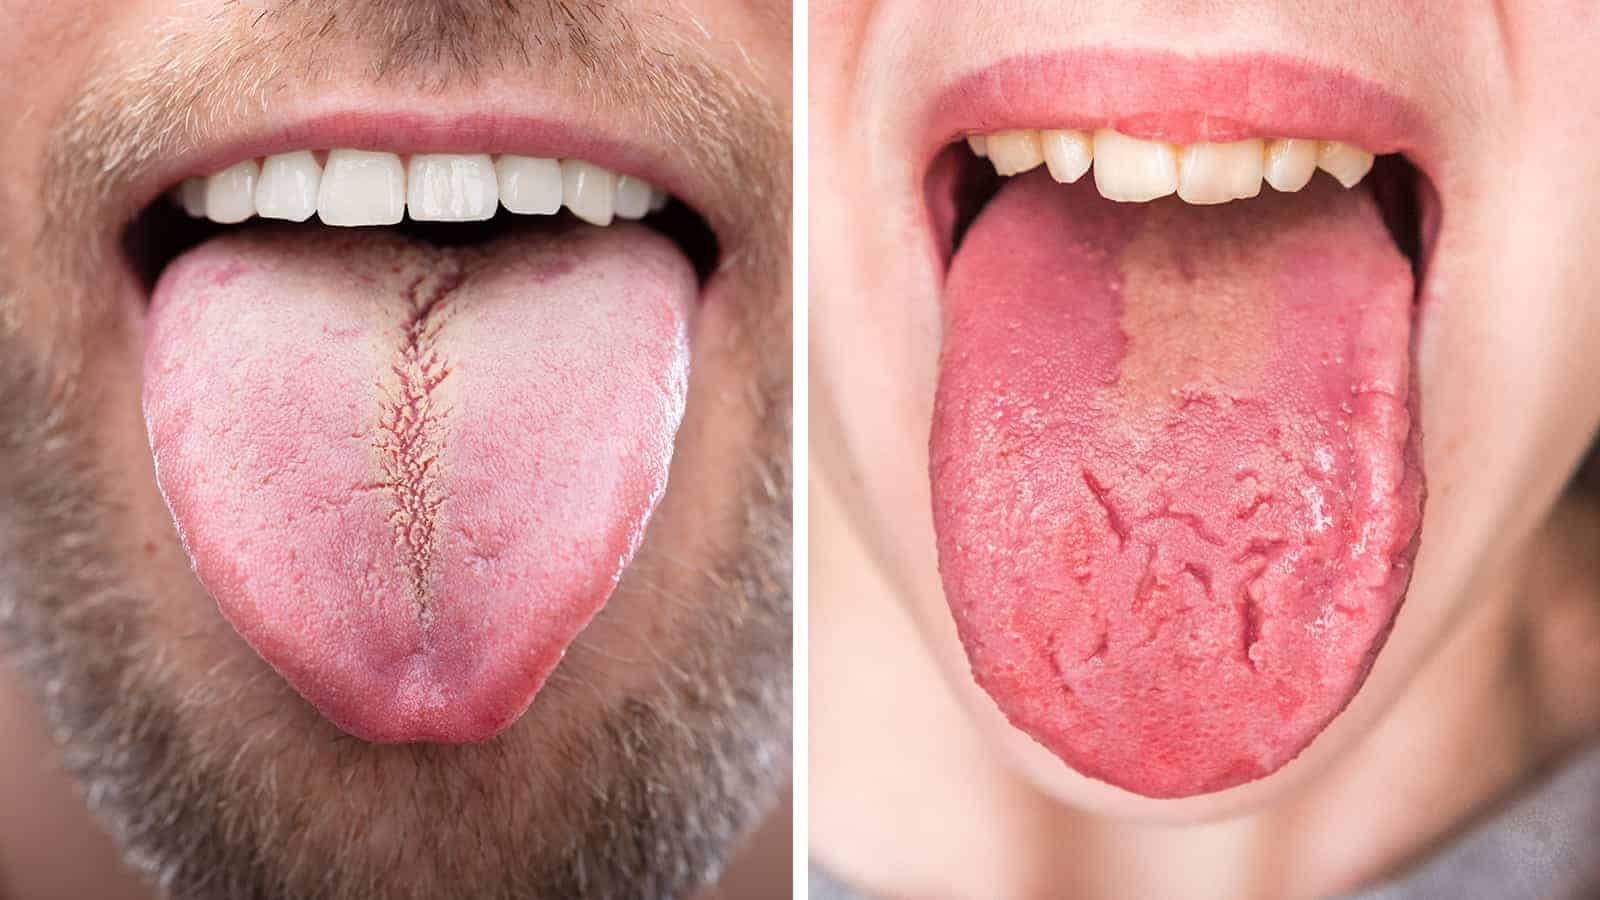 11 Things Your Tongue Can Tell You About Your Health